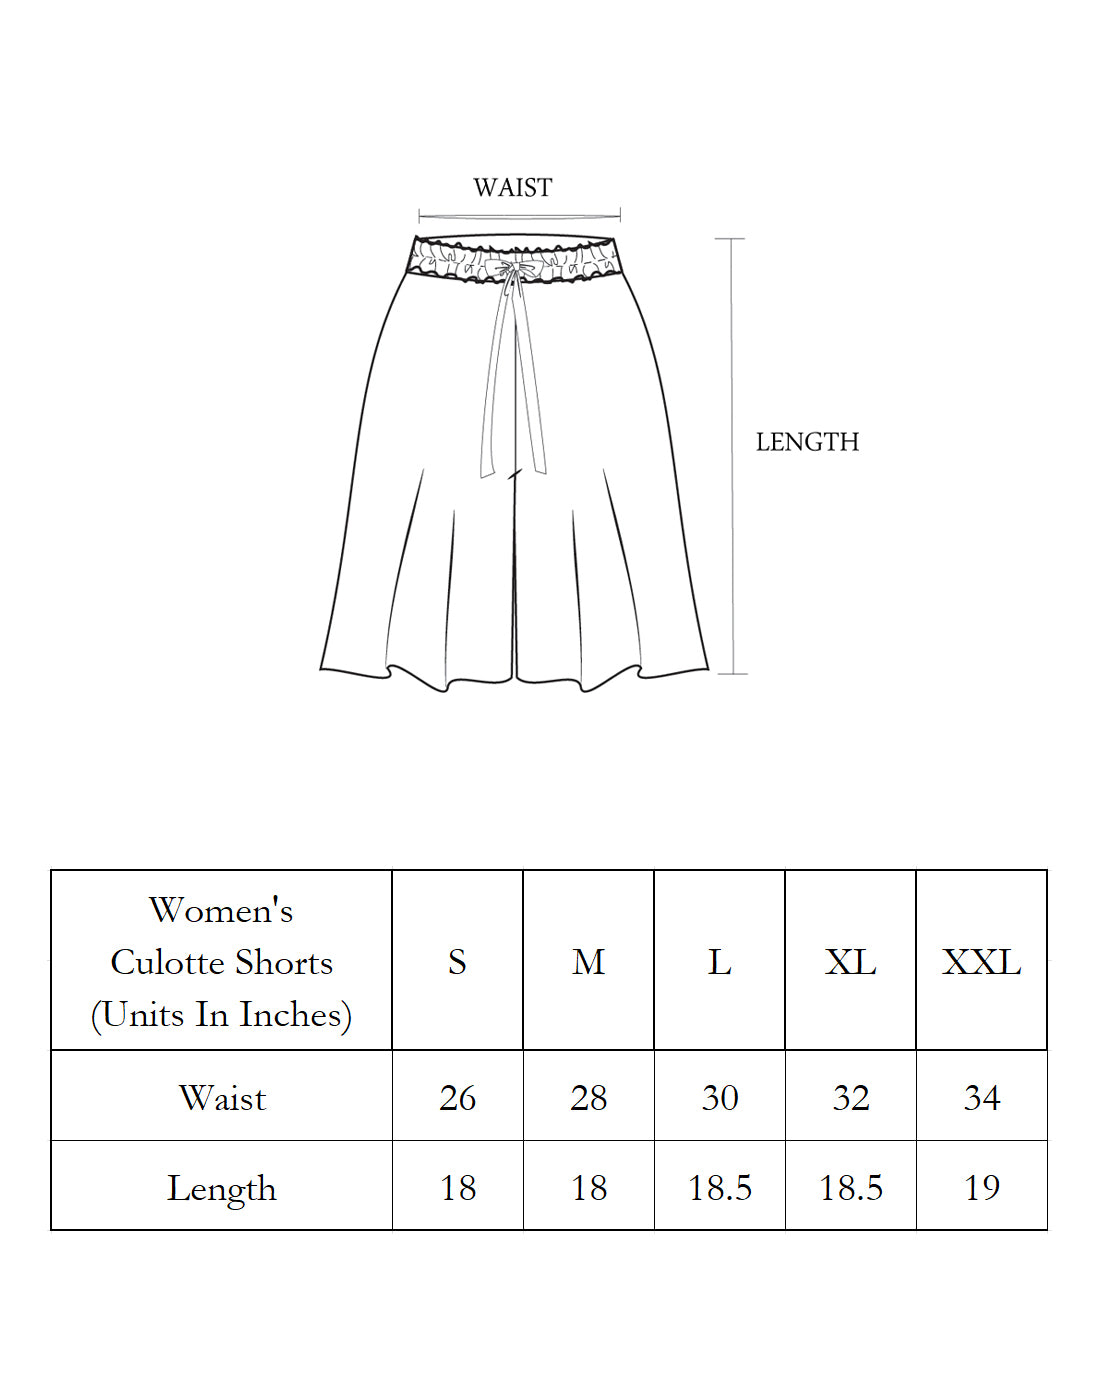 Culottes Shorts for Women-Red Stripes